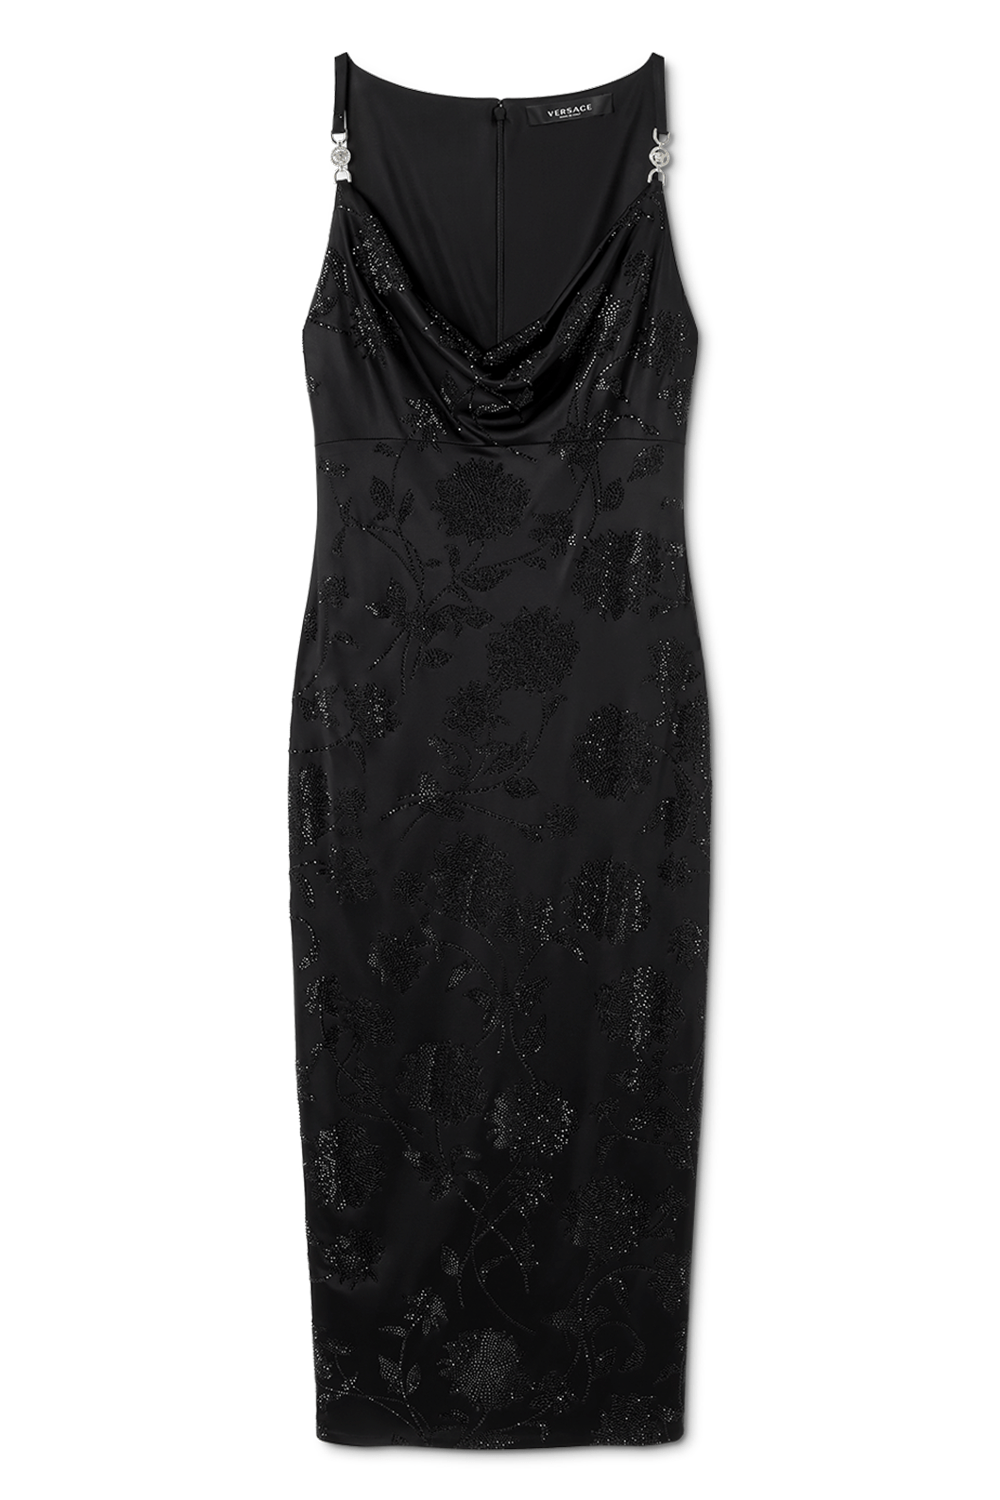 VERSACE-Strass-Embroidered Cocktail Dress-